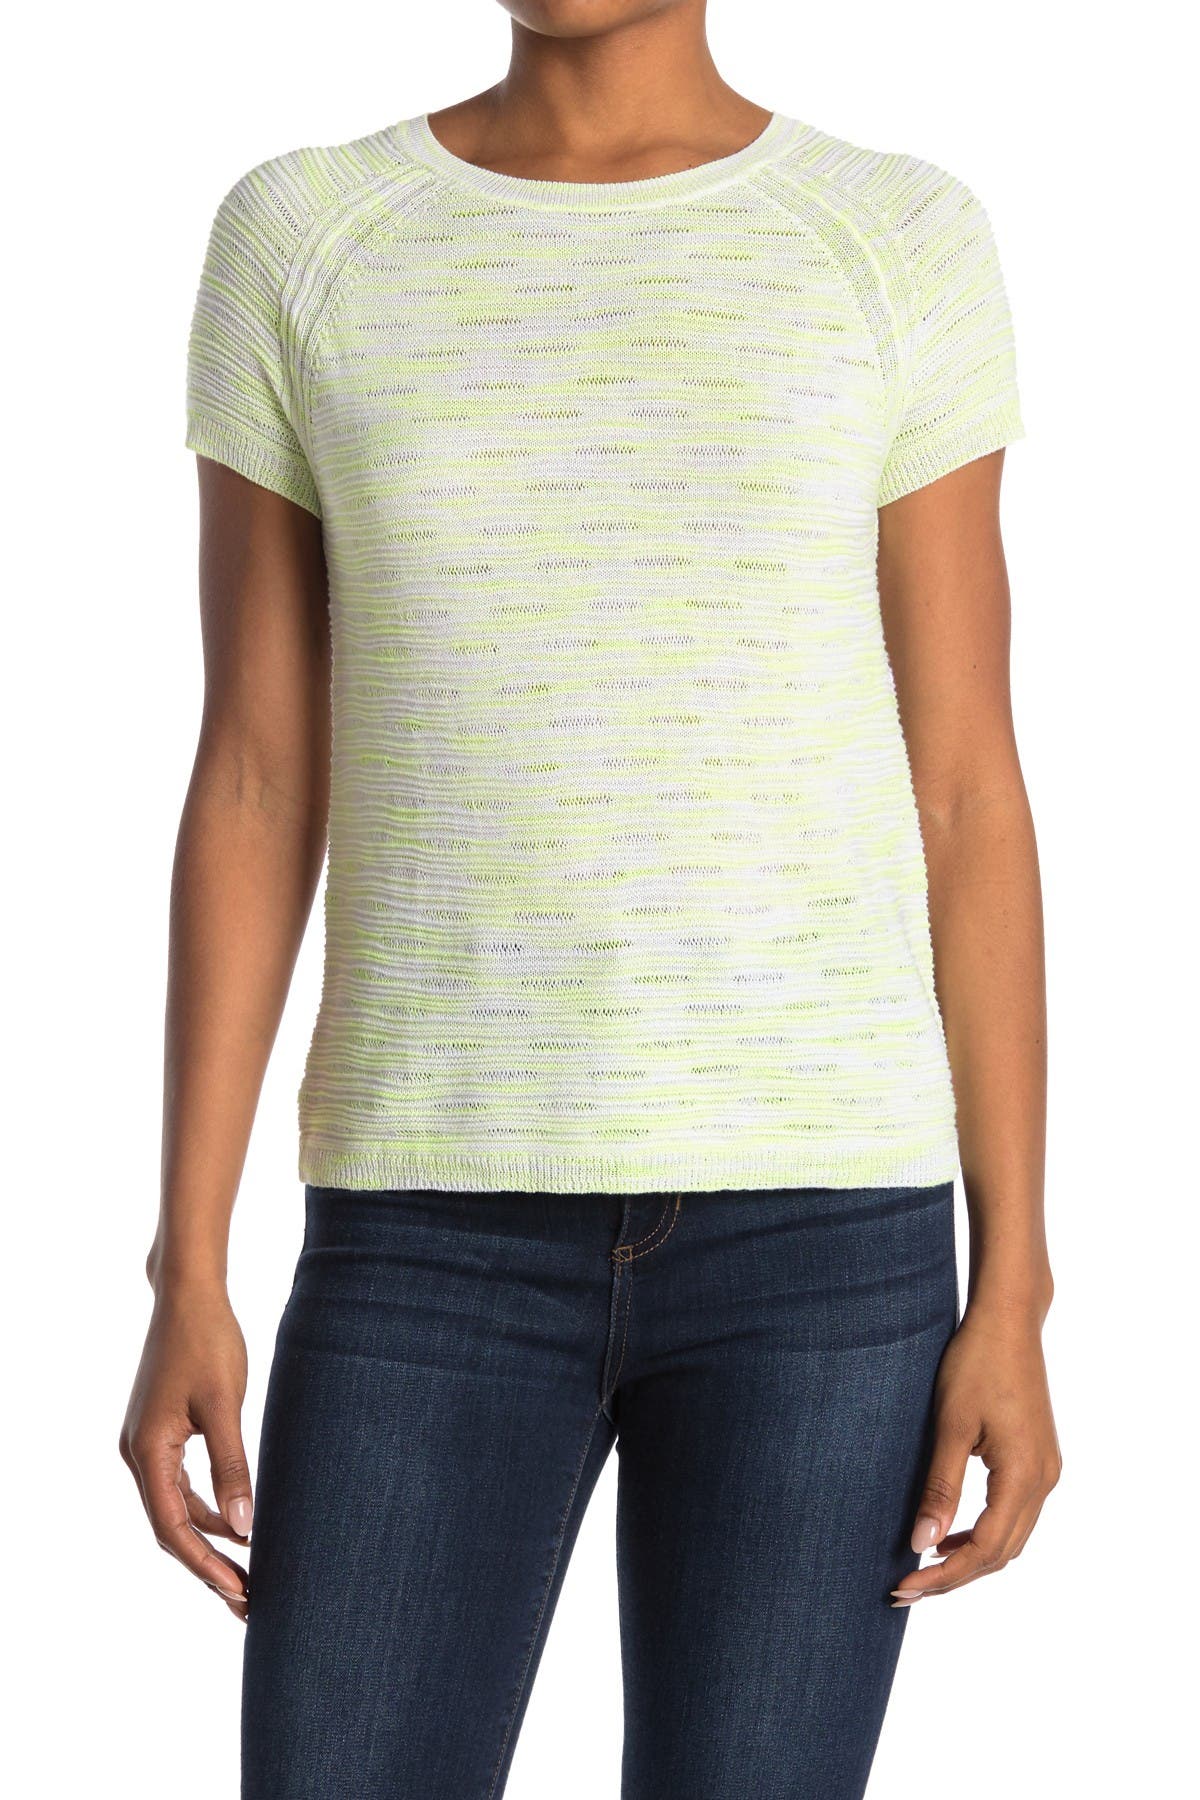 Autumn Cashmere Space Dye Short Sleeve Top In Light/pastel Green2